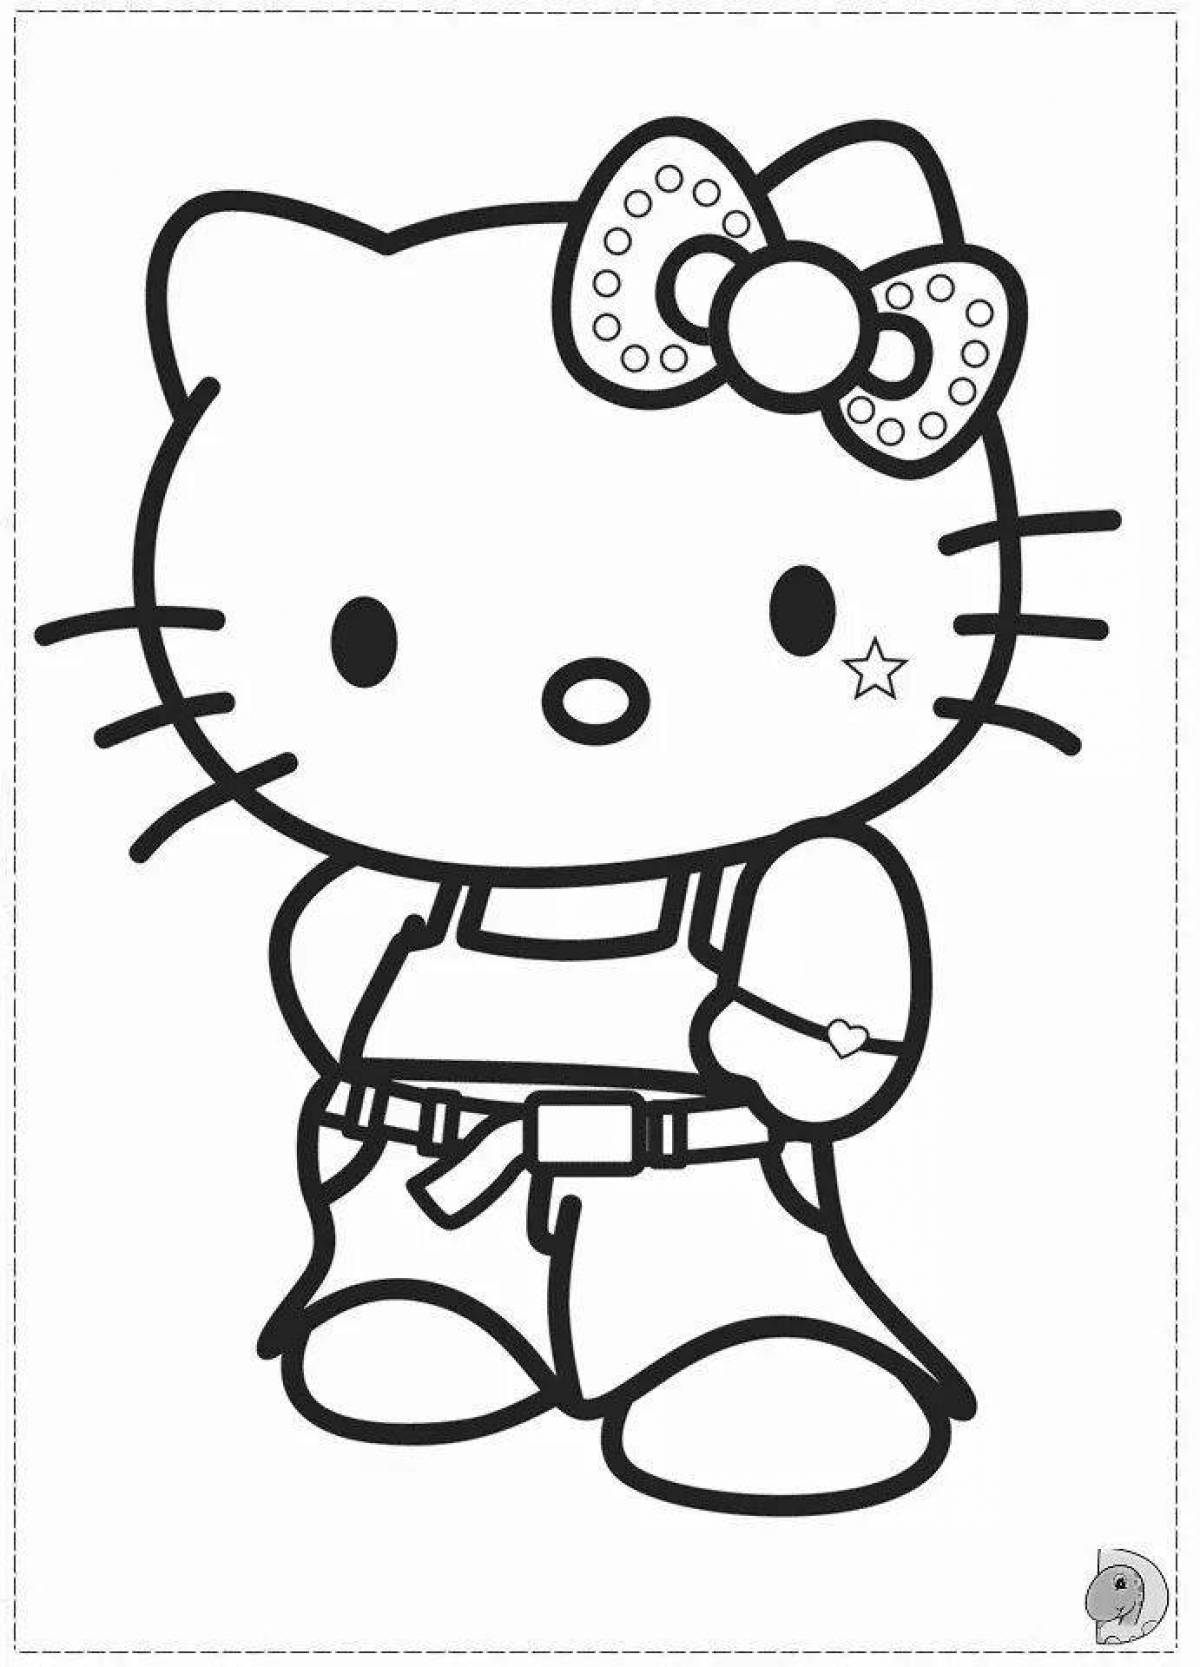 Delightful hello kitty coloring without clothes